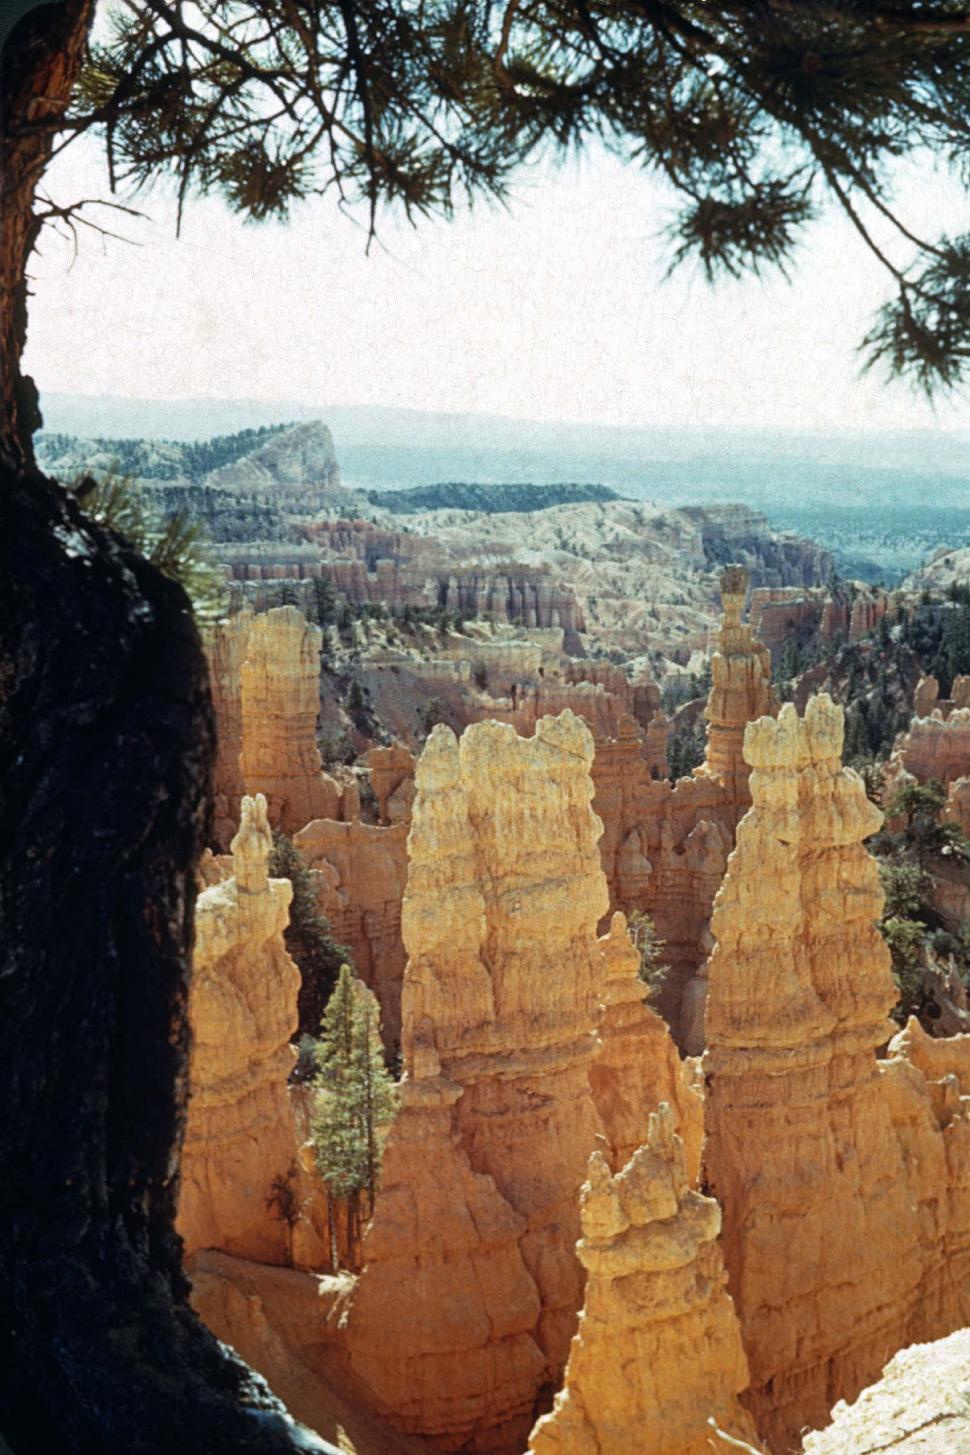 Free Image of bryce canyon national park utah towers landscapes vintage photo hoodoos rocks spires canyons geology geologic formations erosion eroded vintage photograph FACAT001 